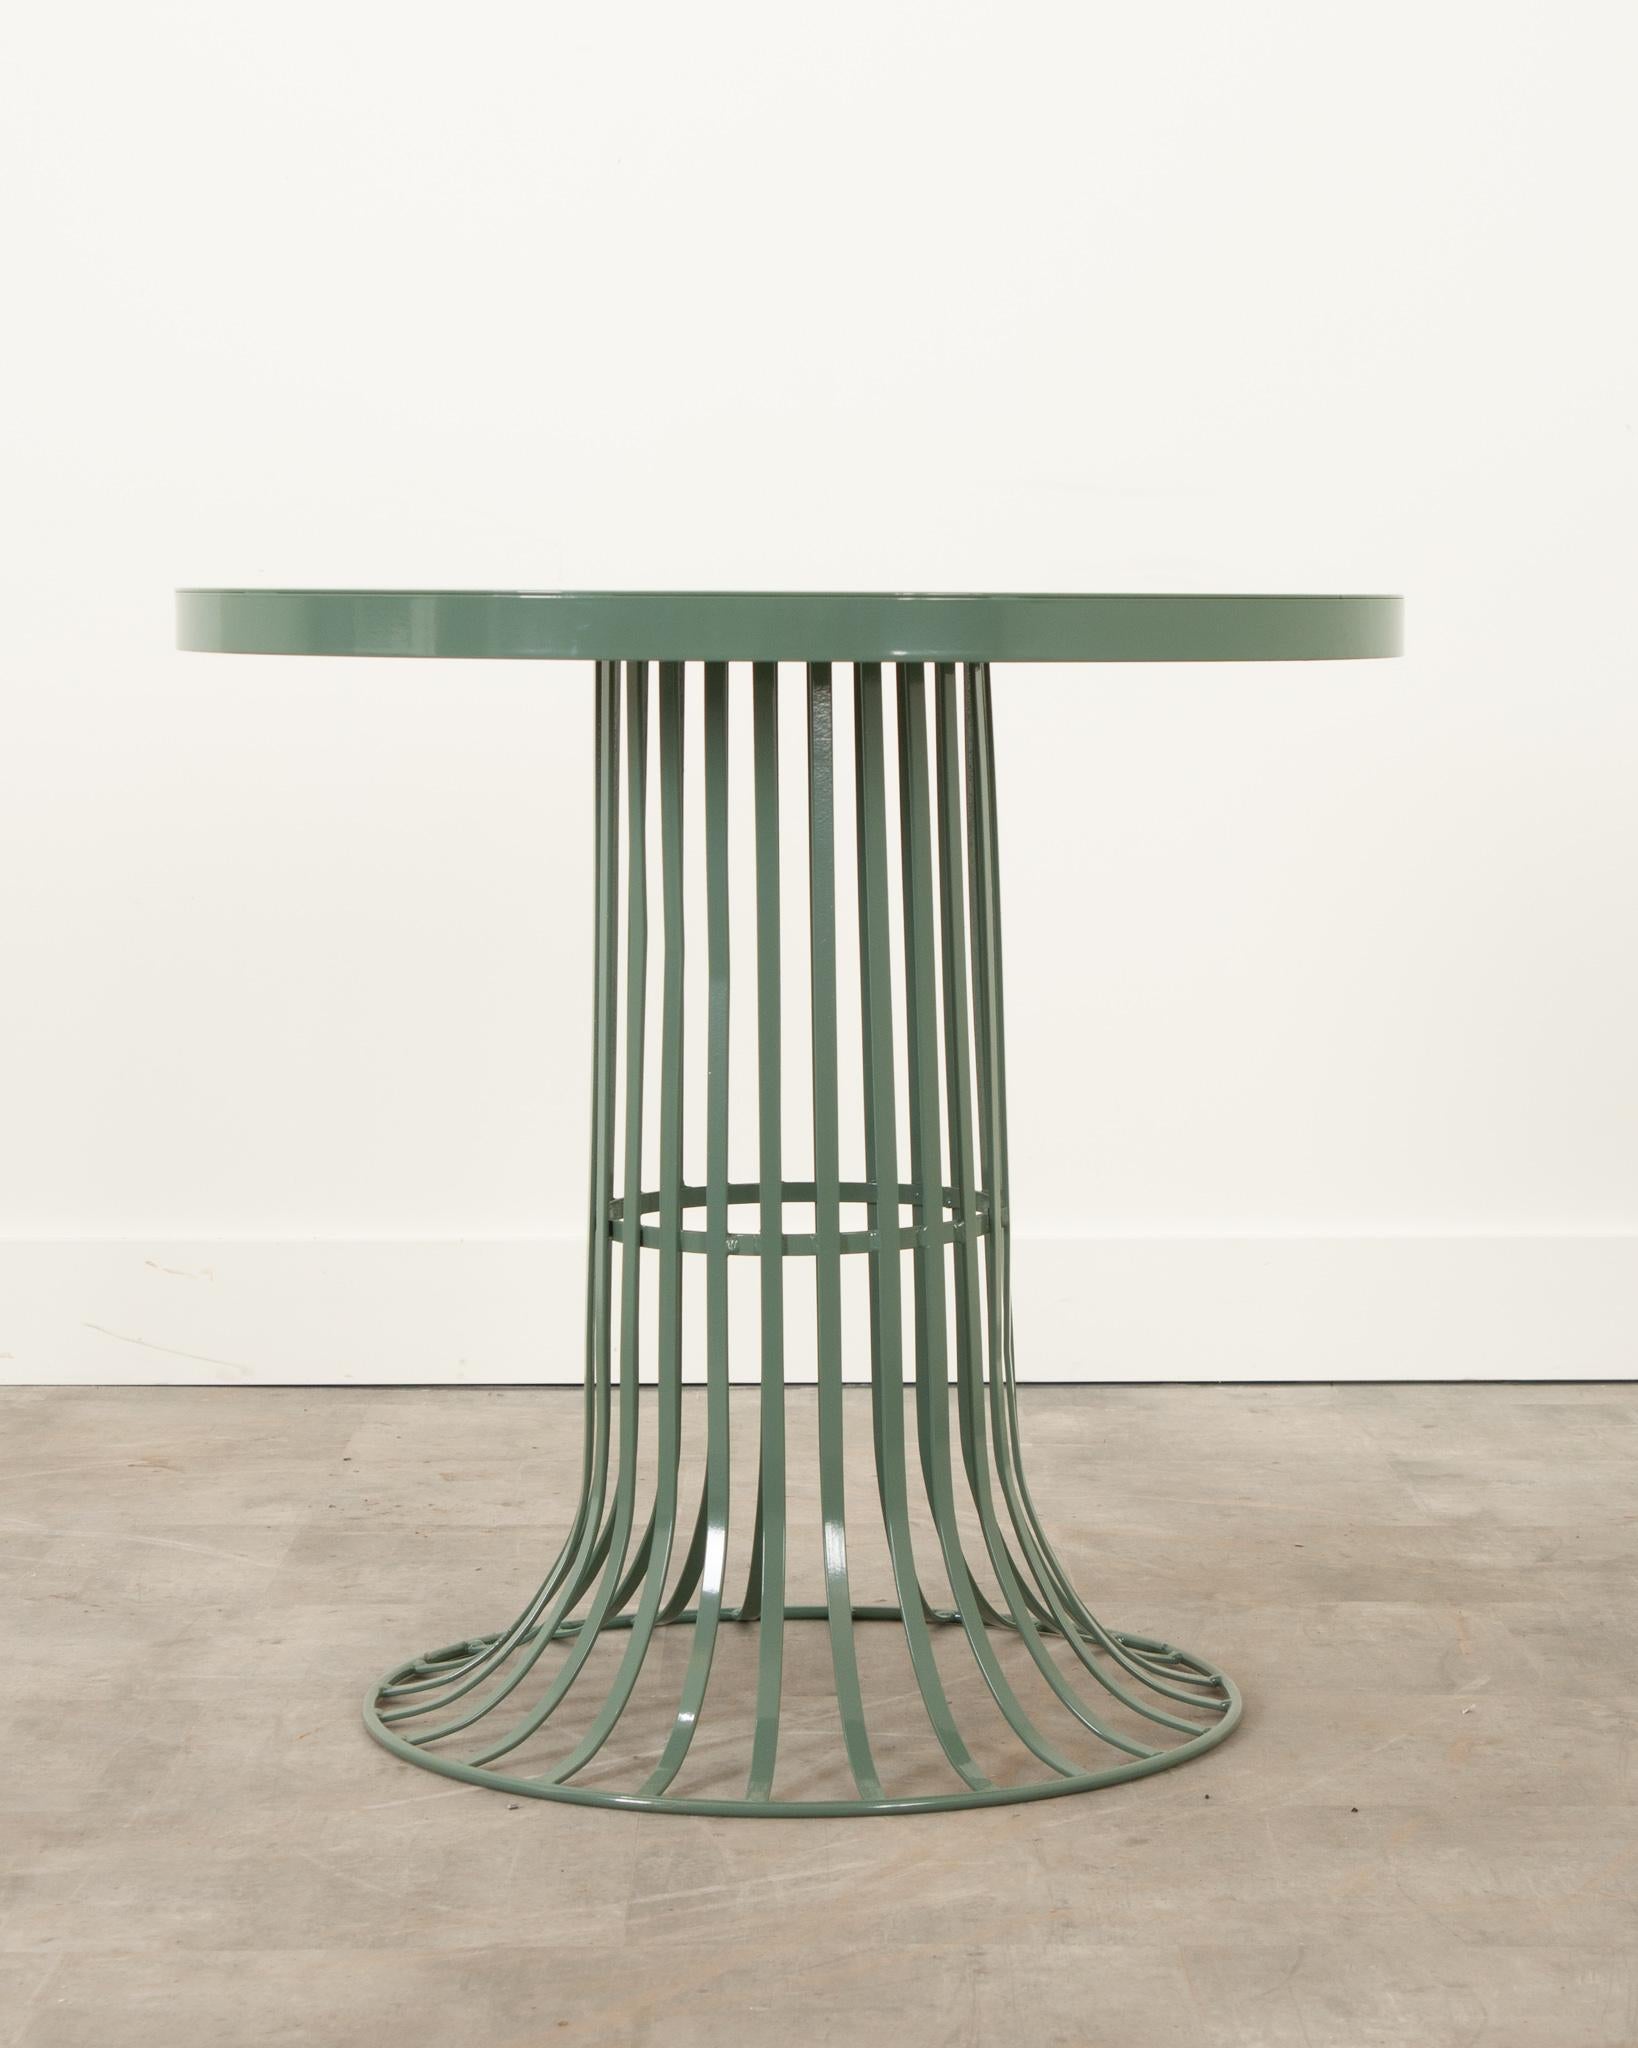 This charming French garden table is the perfect combination of sleek design and sturdy material. Made of iron, it’s been sandblasted and powder-coated for protection against the elements. The base is originally a vintage French trash bin that’s